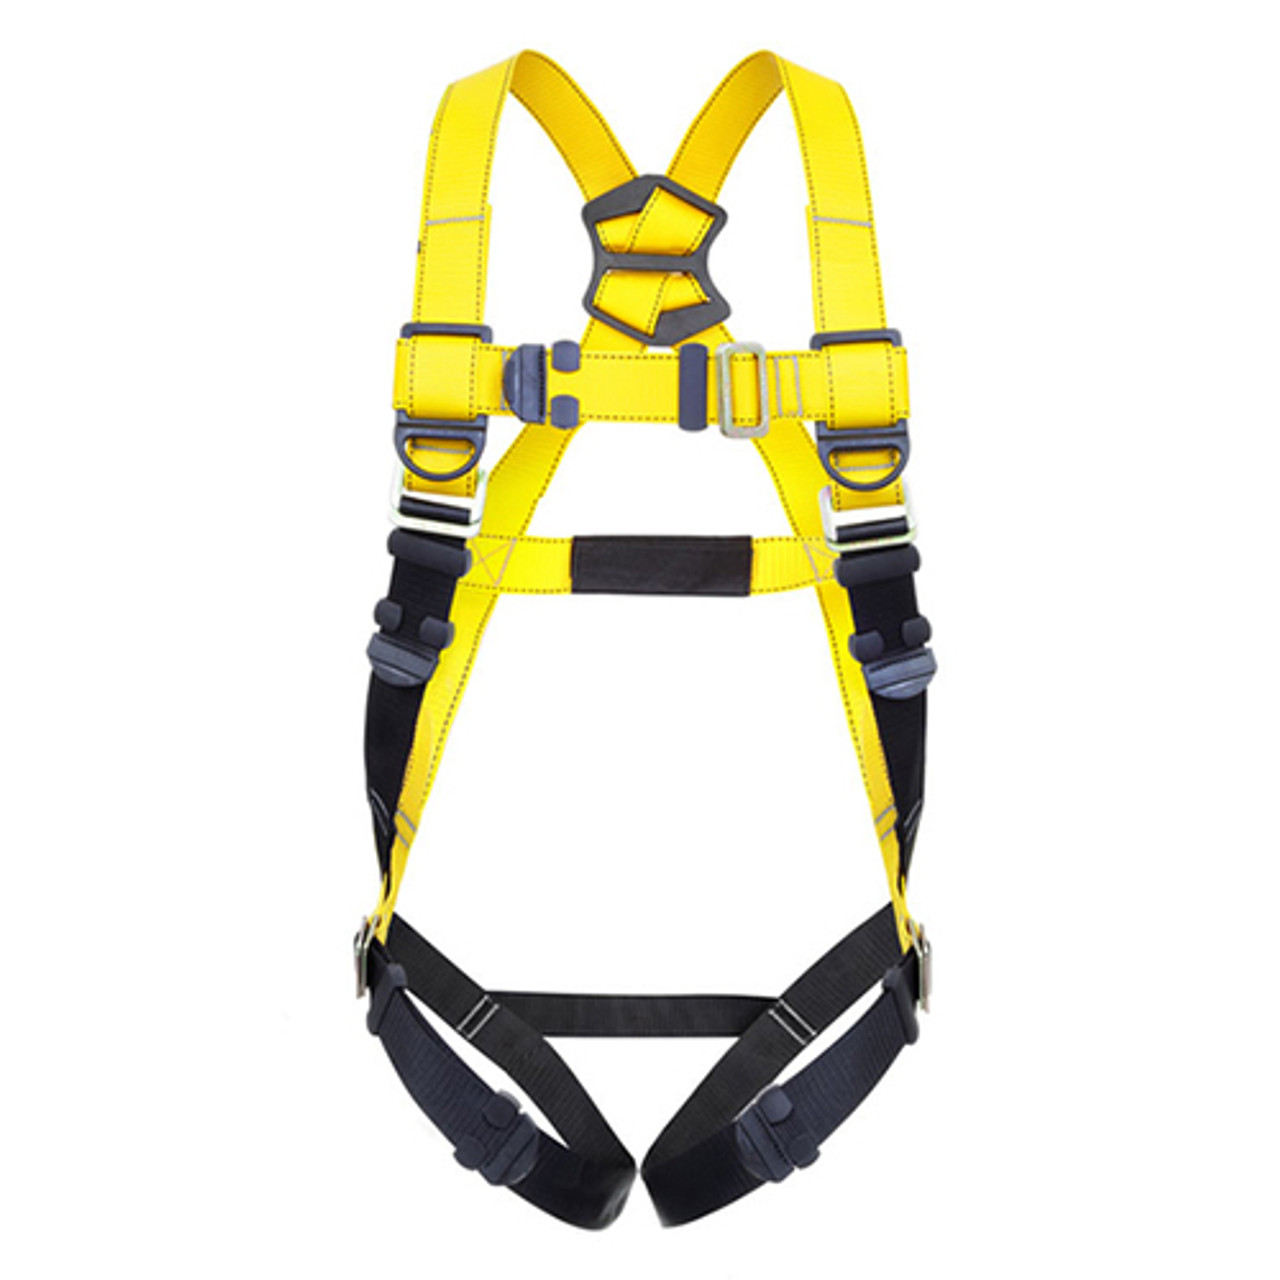 Full body harness for fall protection.